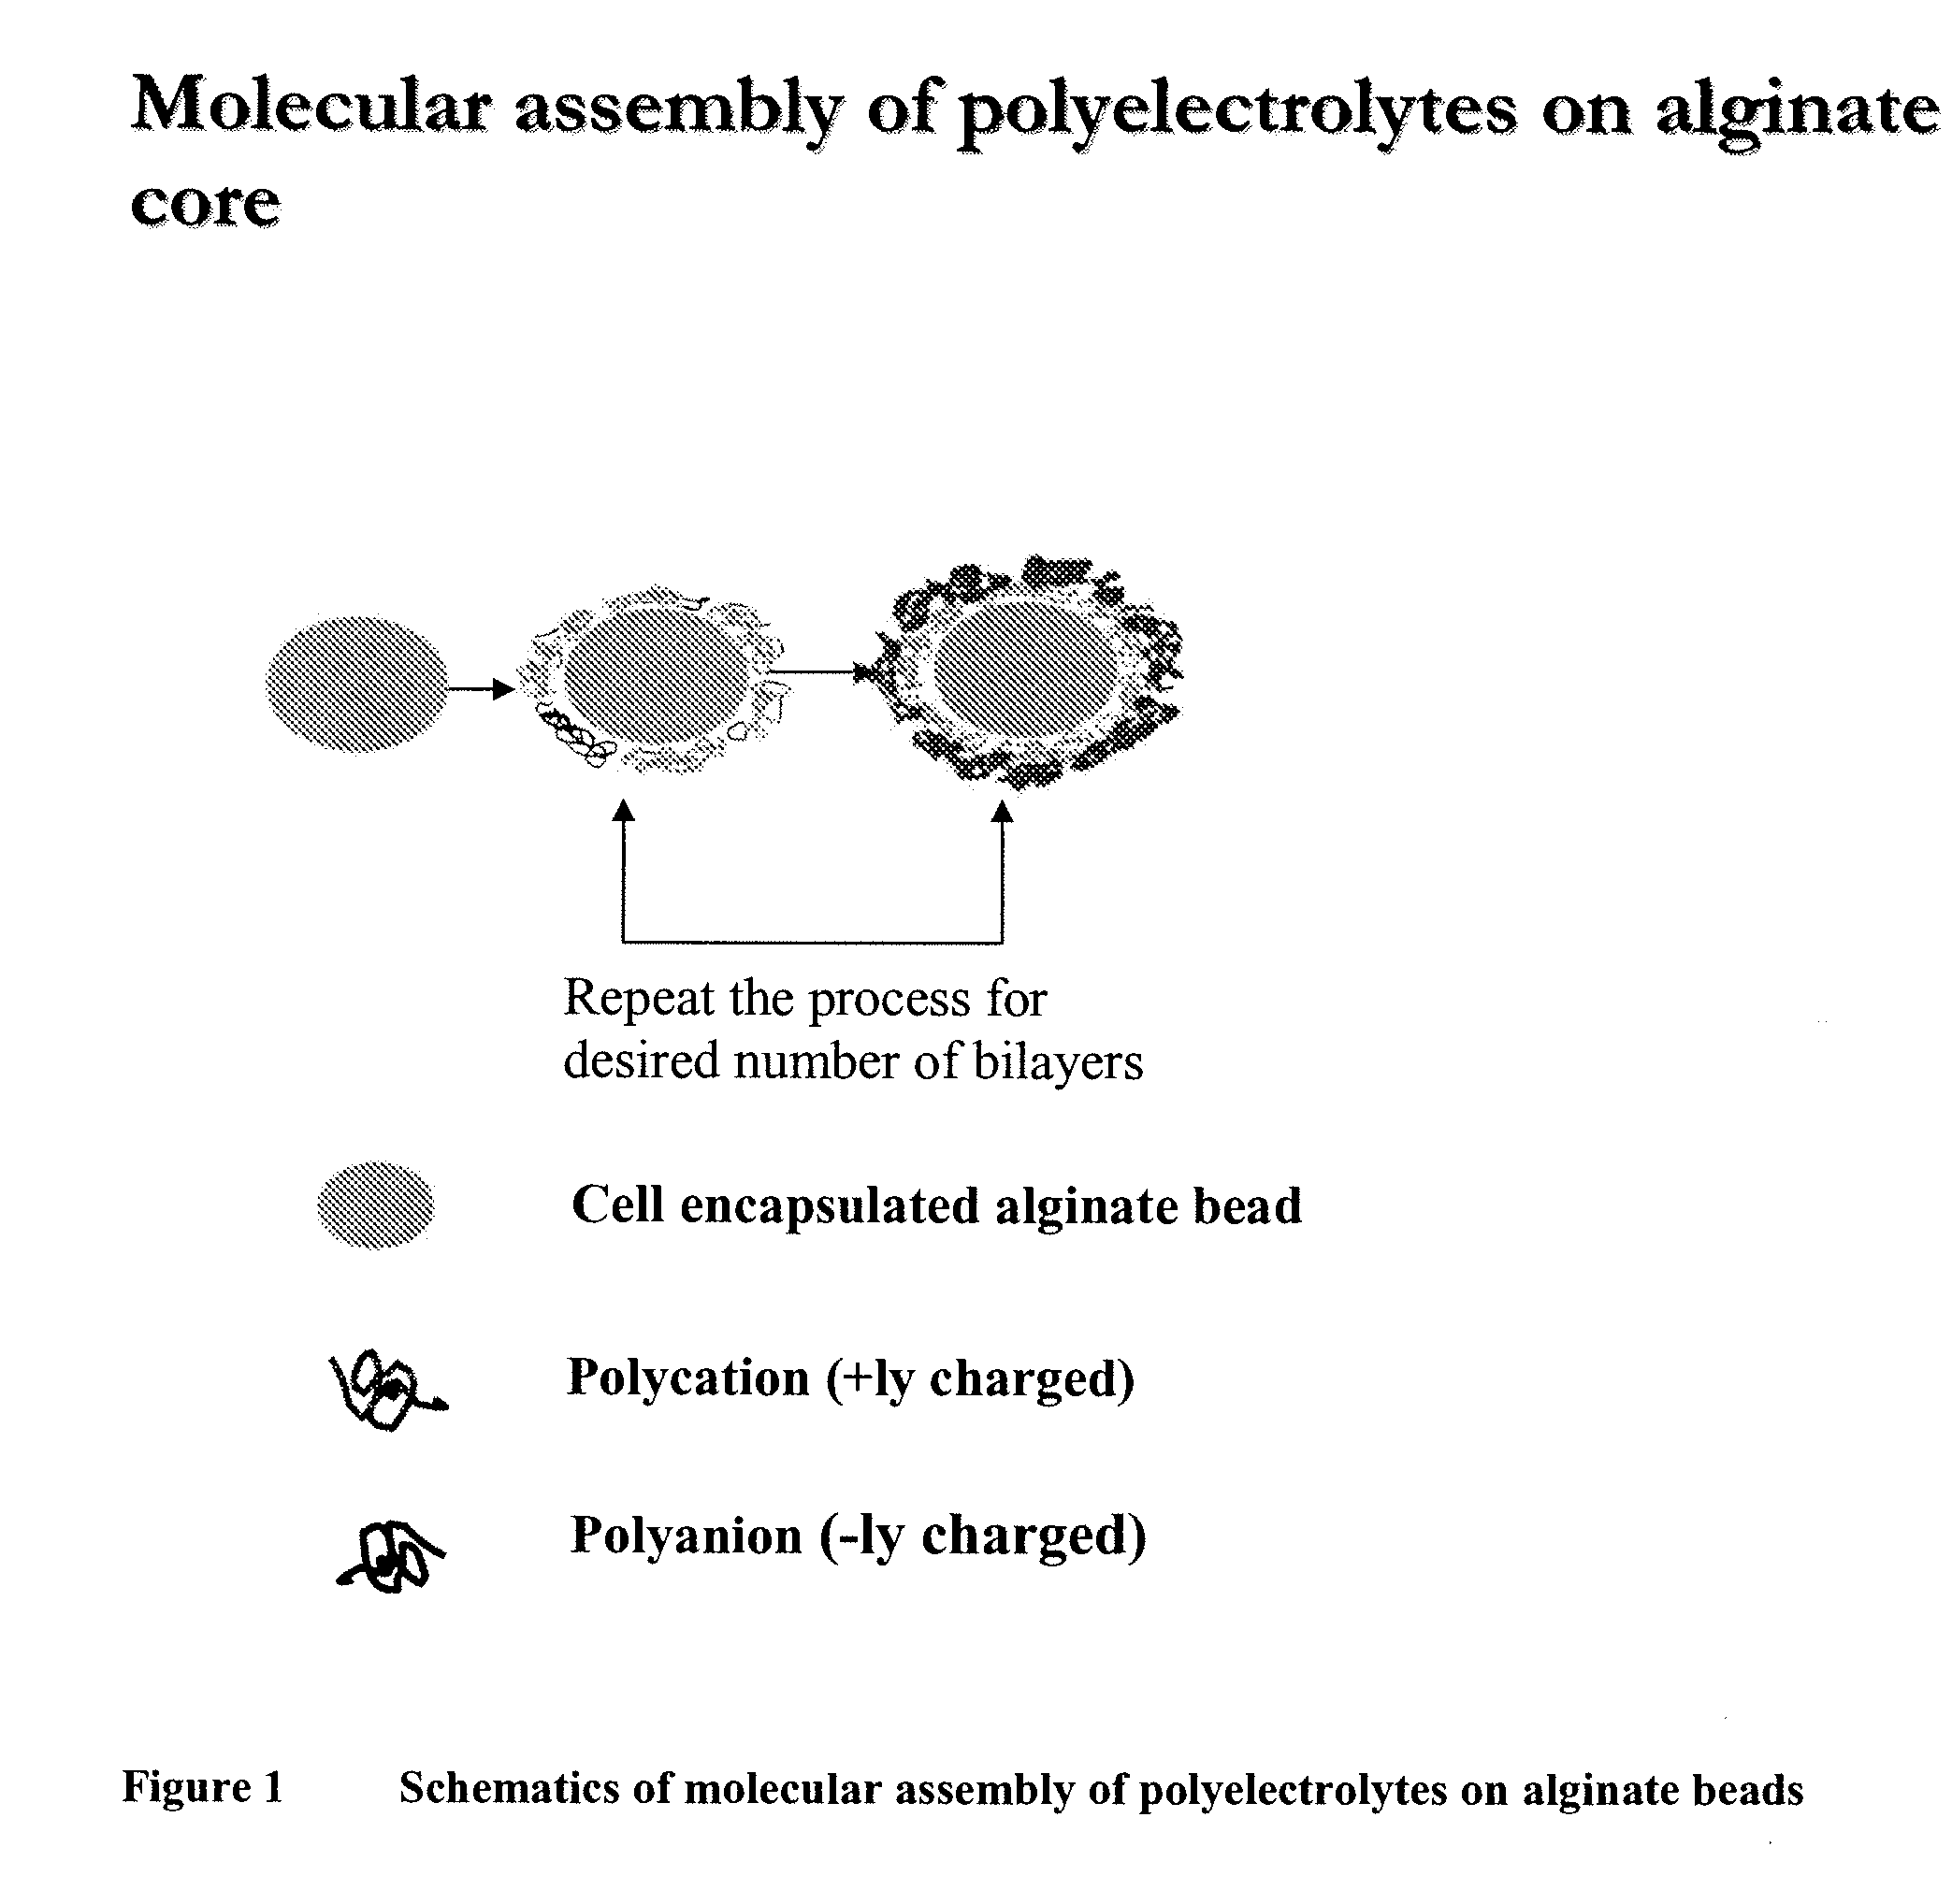 Multilayered polyelectrolyte-based capsules for cell encapsulation and delivery of therapeutic compositions